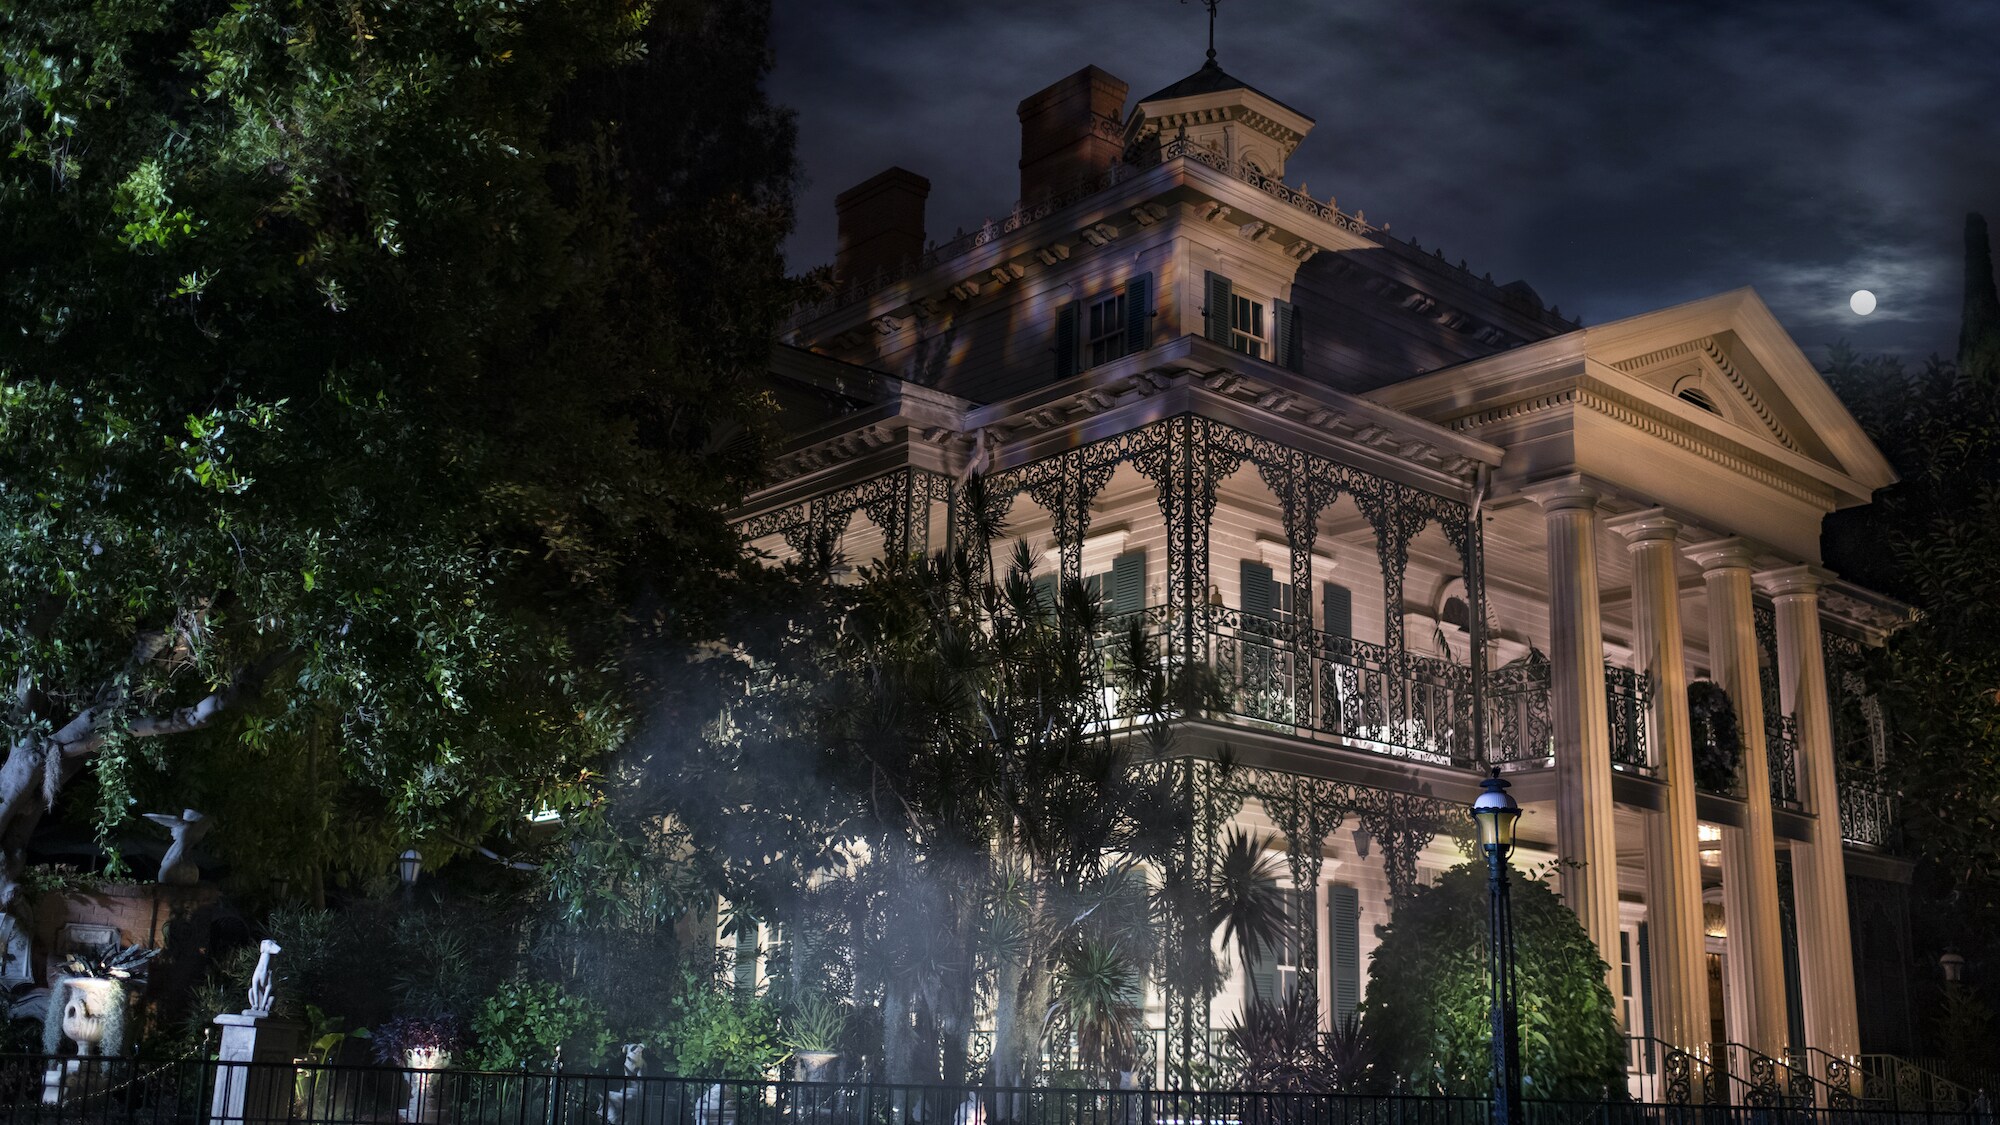 Image of the Haunted Mansion exterior at night.